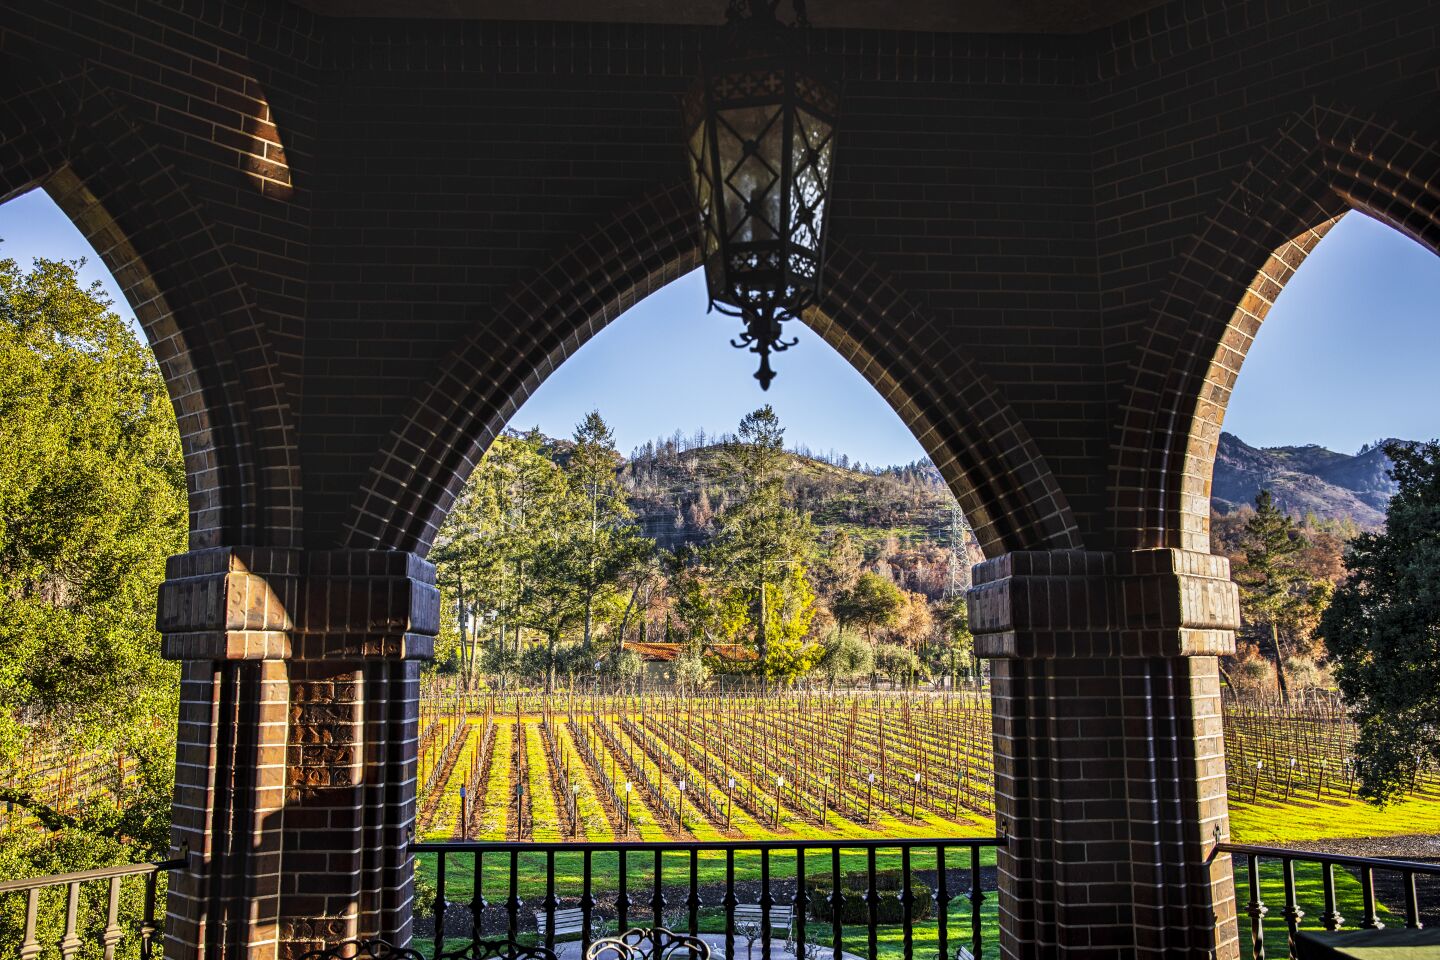 Vineyards seen through an arched opening